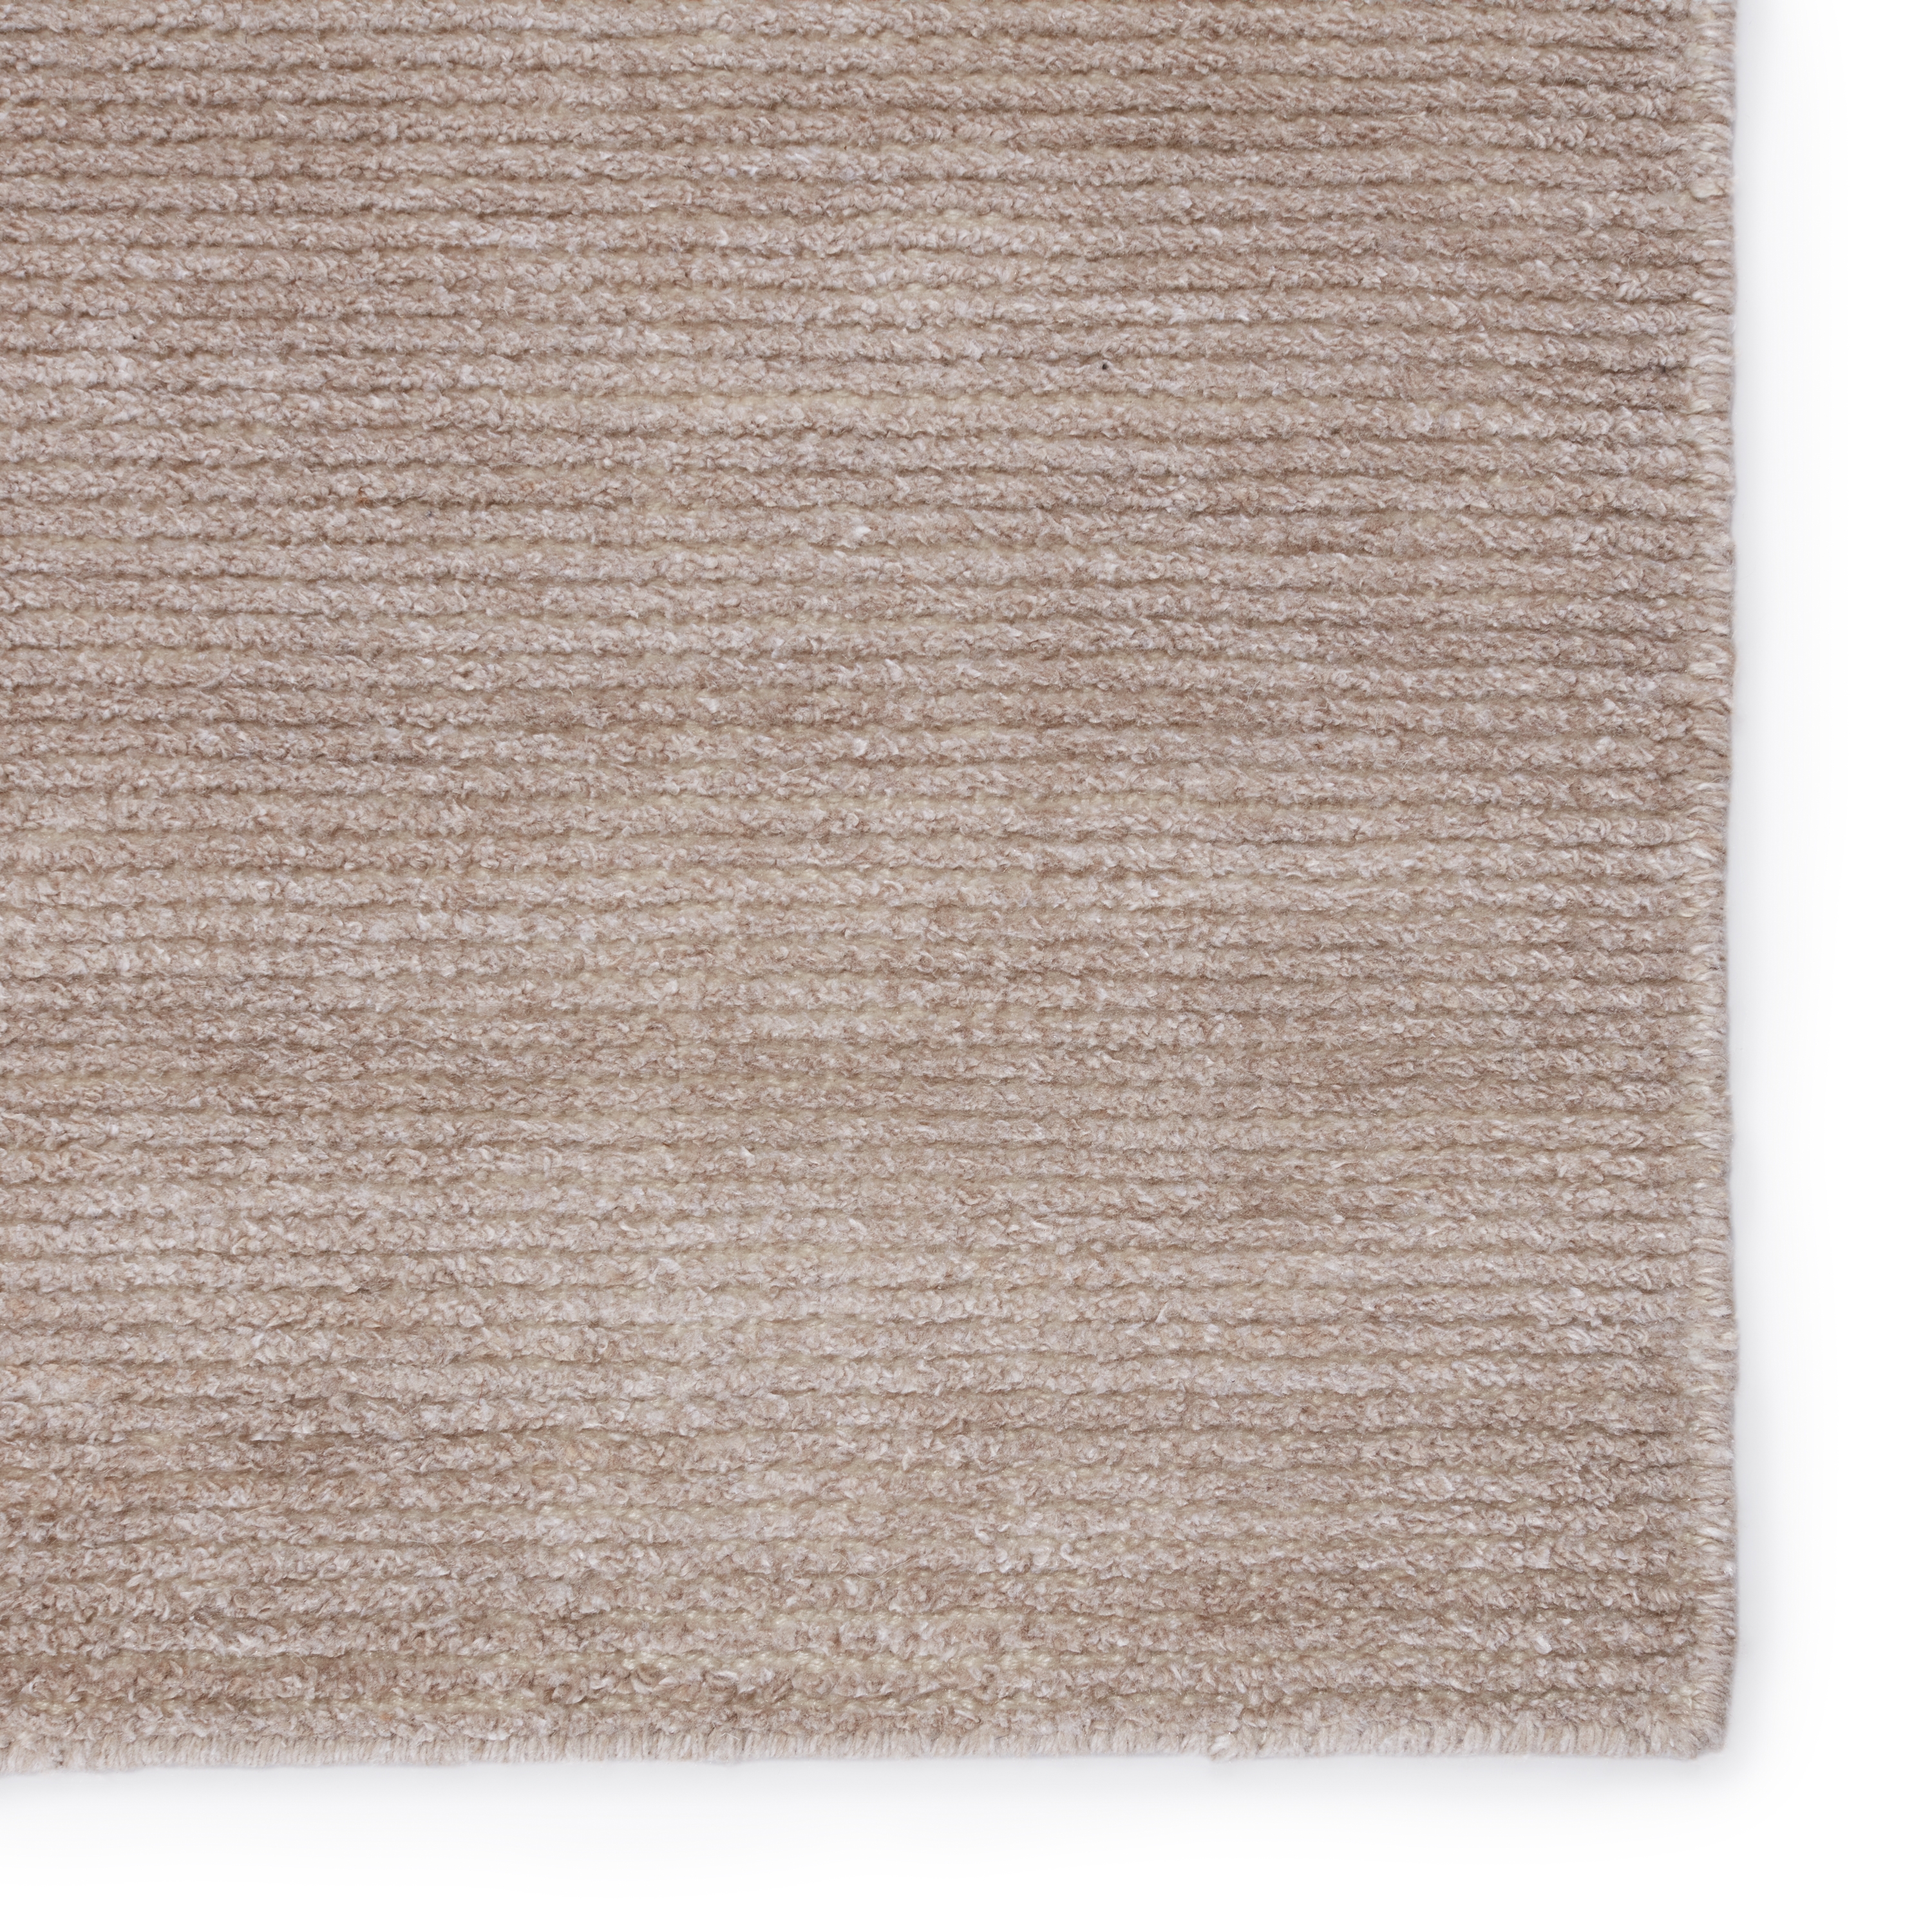 Limon Indoor/ Outdoor Solid Light Taupe Area Rug (9'X12') - Image 3